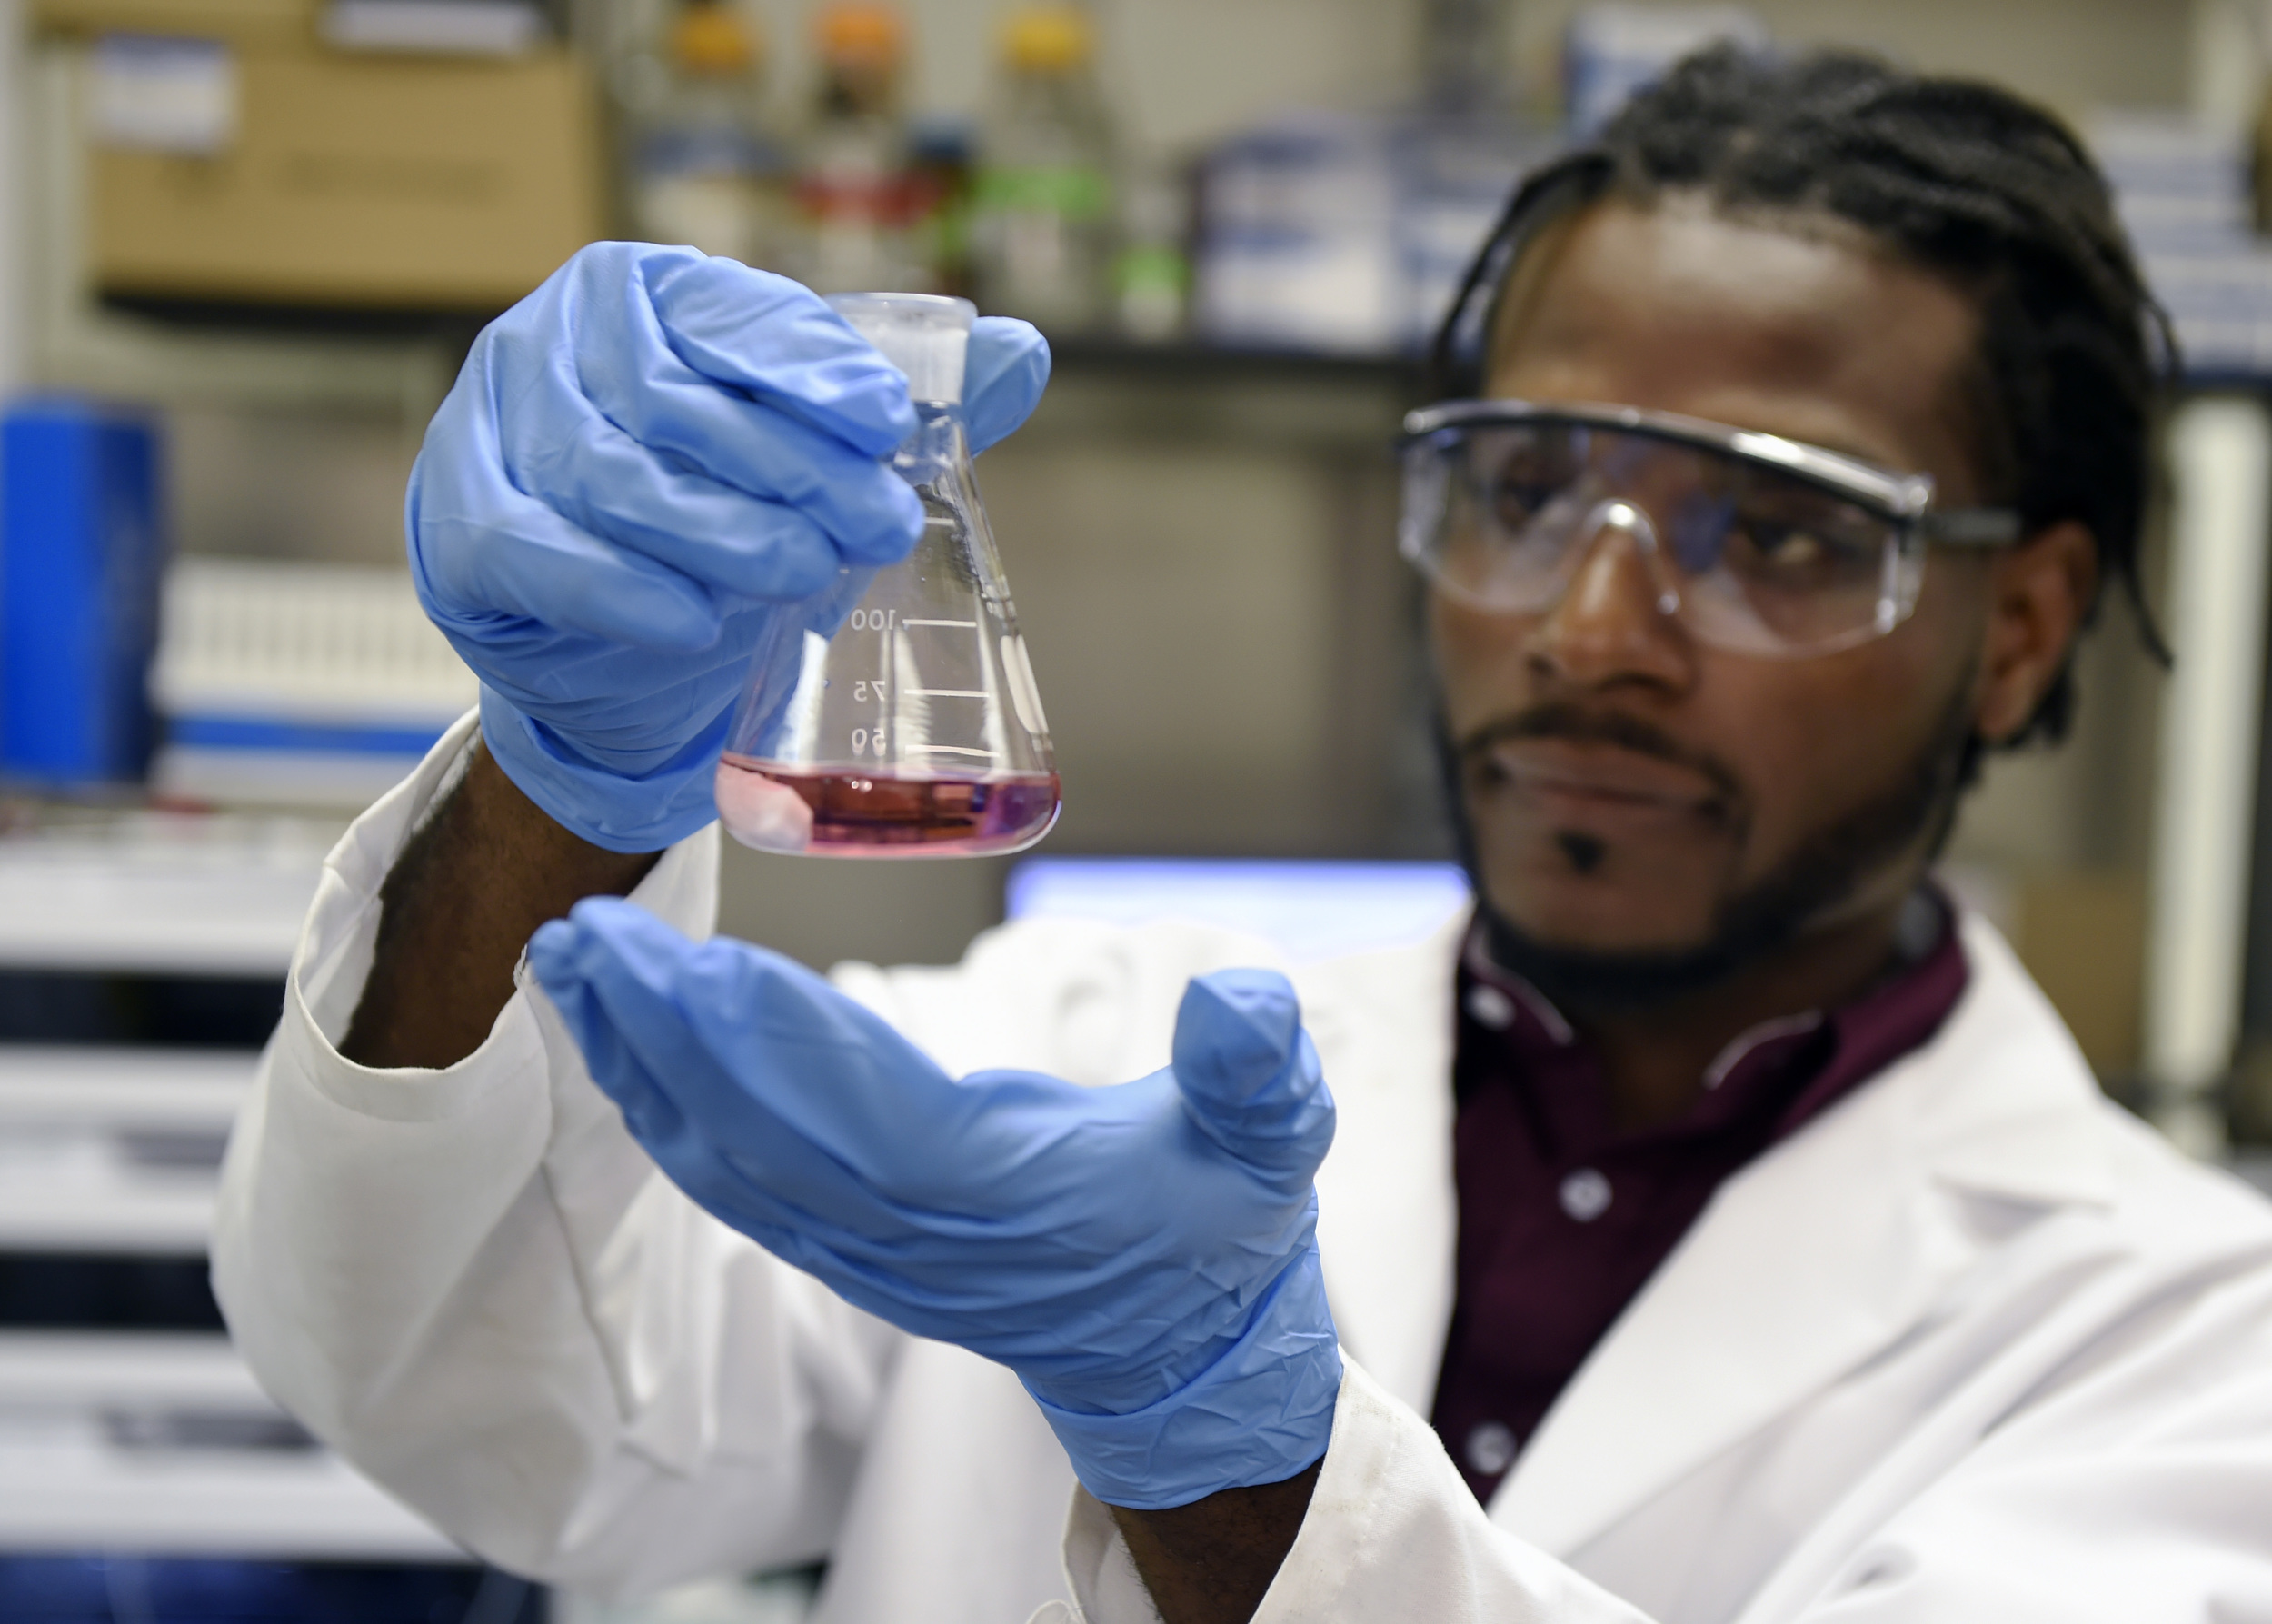   Washington, D.C.  - Morgan State physics major Derick Buckles works in the lab during a 10-week internship at the Naval Research Laboratory in Washington, D.C., part of a summer research program administered by the Department of the Navy's Historic